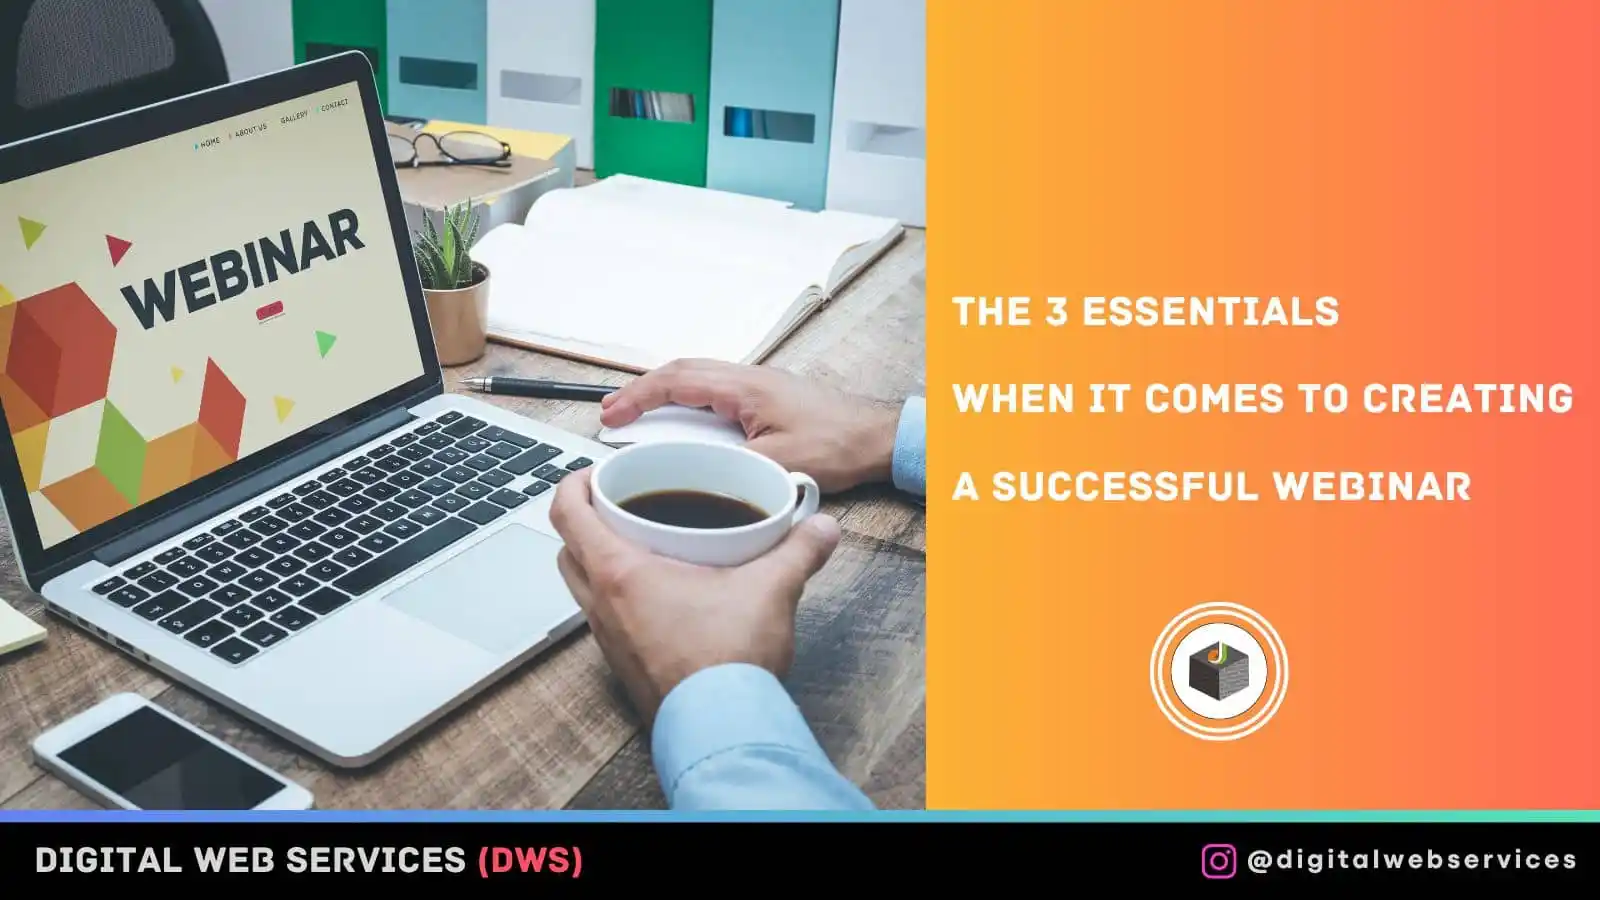 The 3 Essentials When It Comes To Creating A Successful Webinar